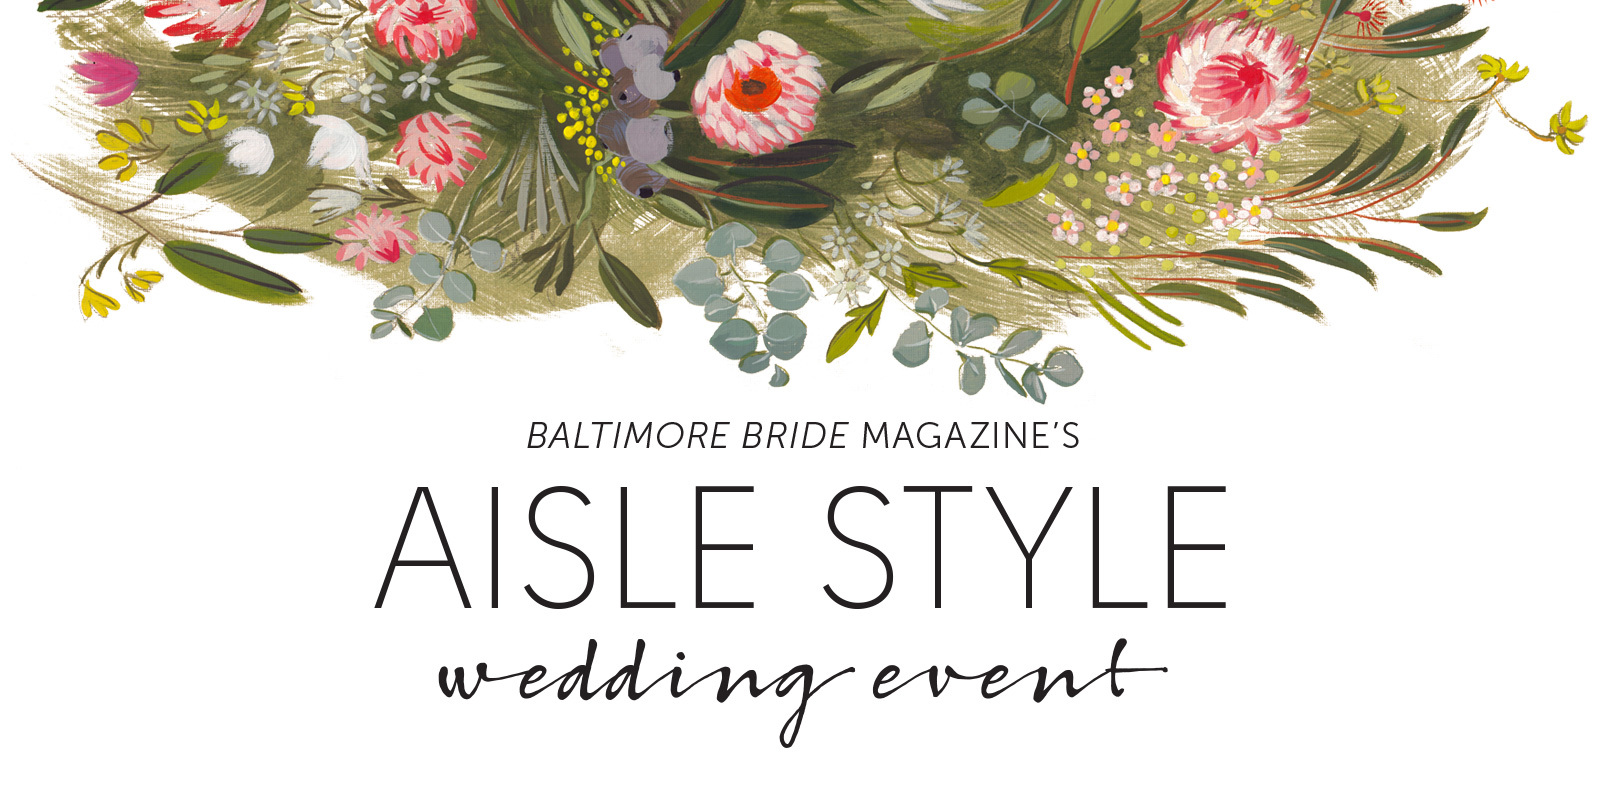 Come See Us at Baltimore Bride Aisle Style Wedding Event. Desktop Image